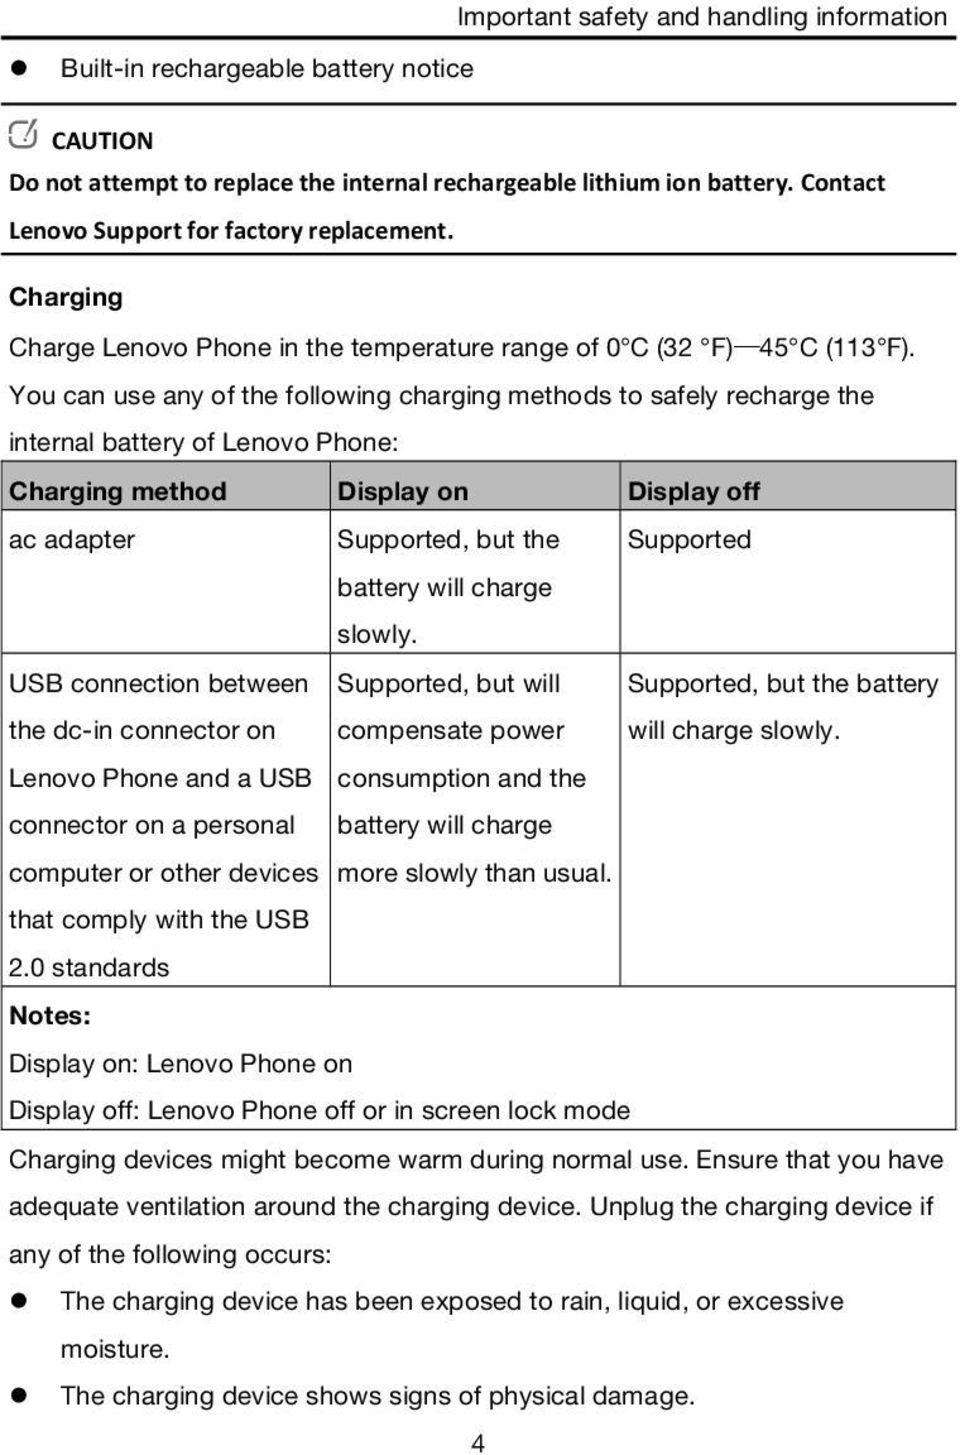 You can use any of the following charging methods to safely recharge the internal battery of Lenovo Phone: Charging method Display on Display off ac adapter Supported, but the Supported battery will